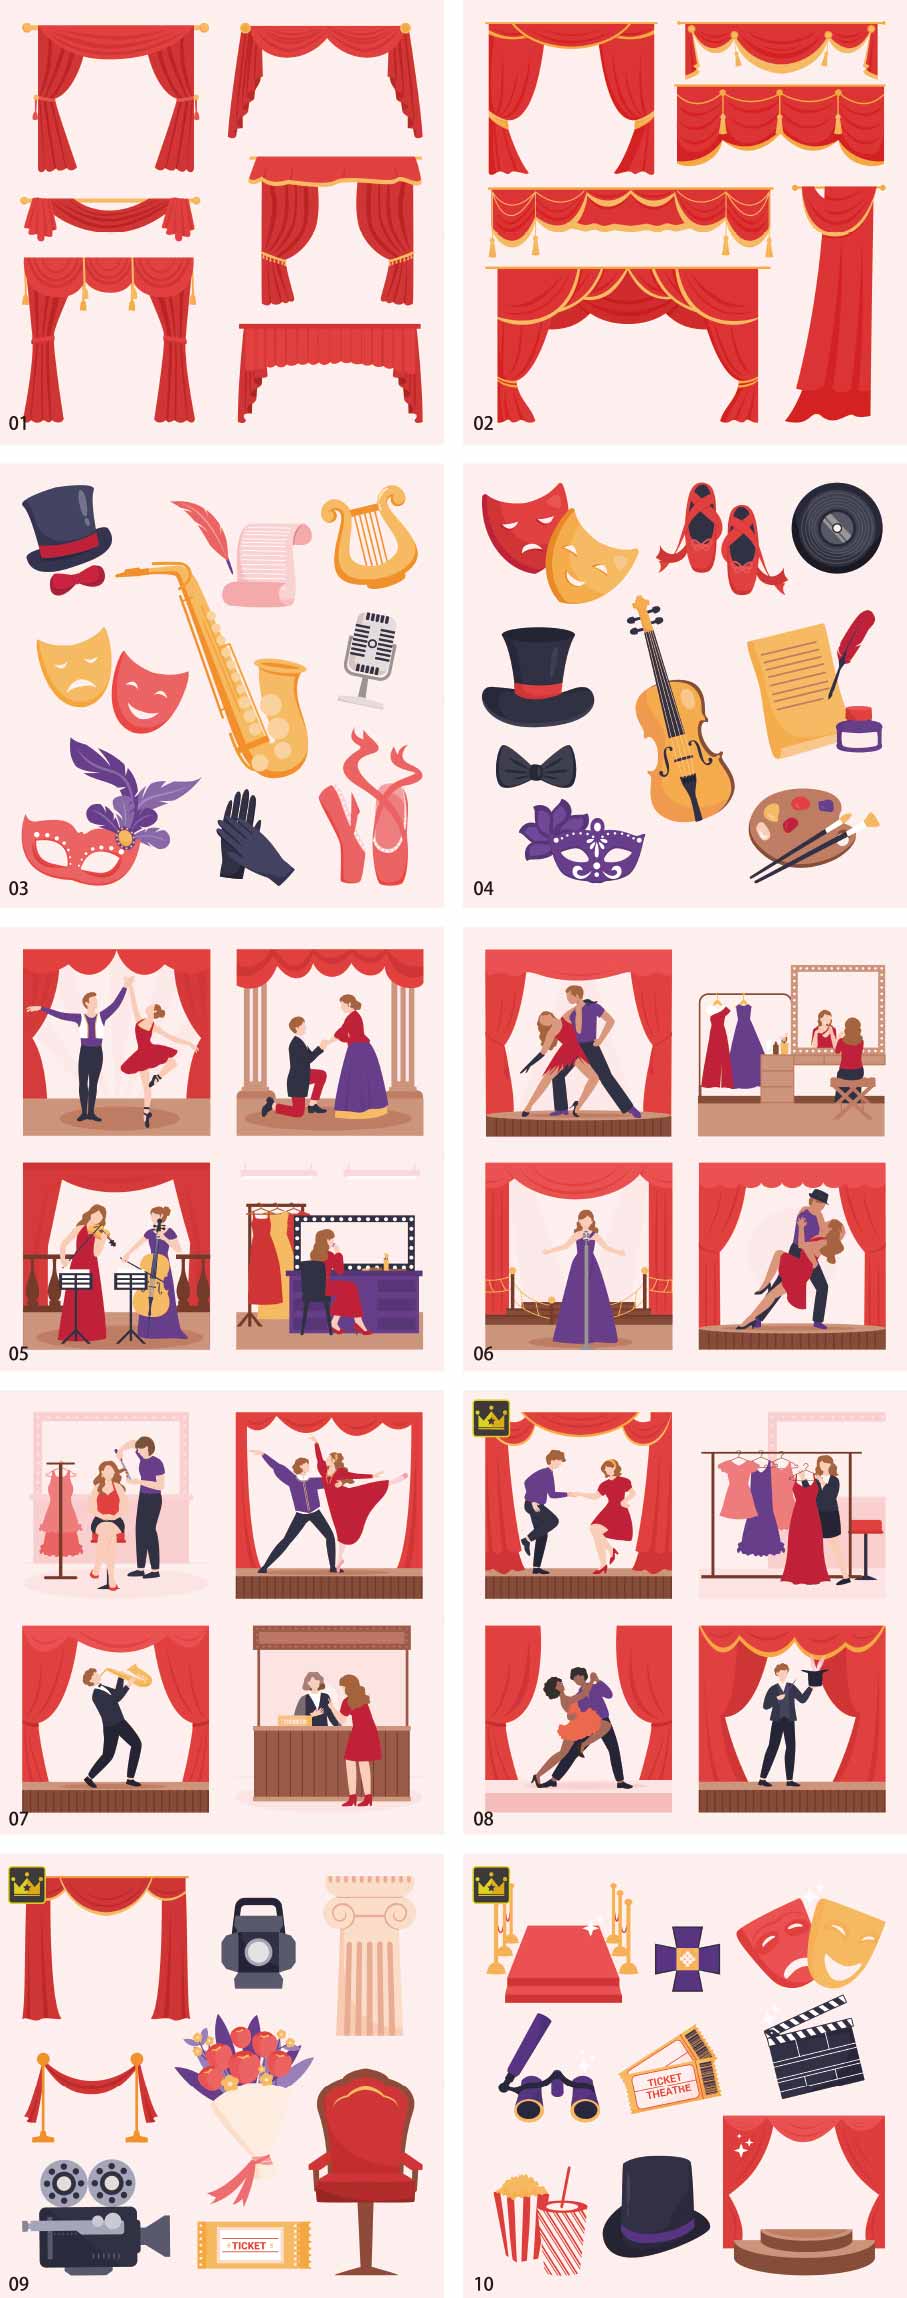 Illustration collection of stage and theater